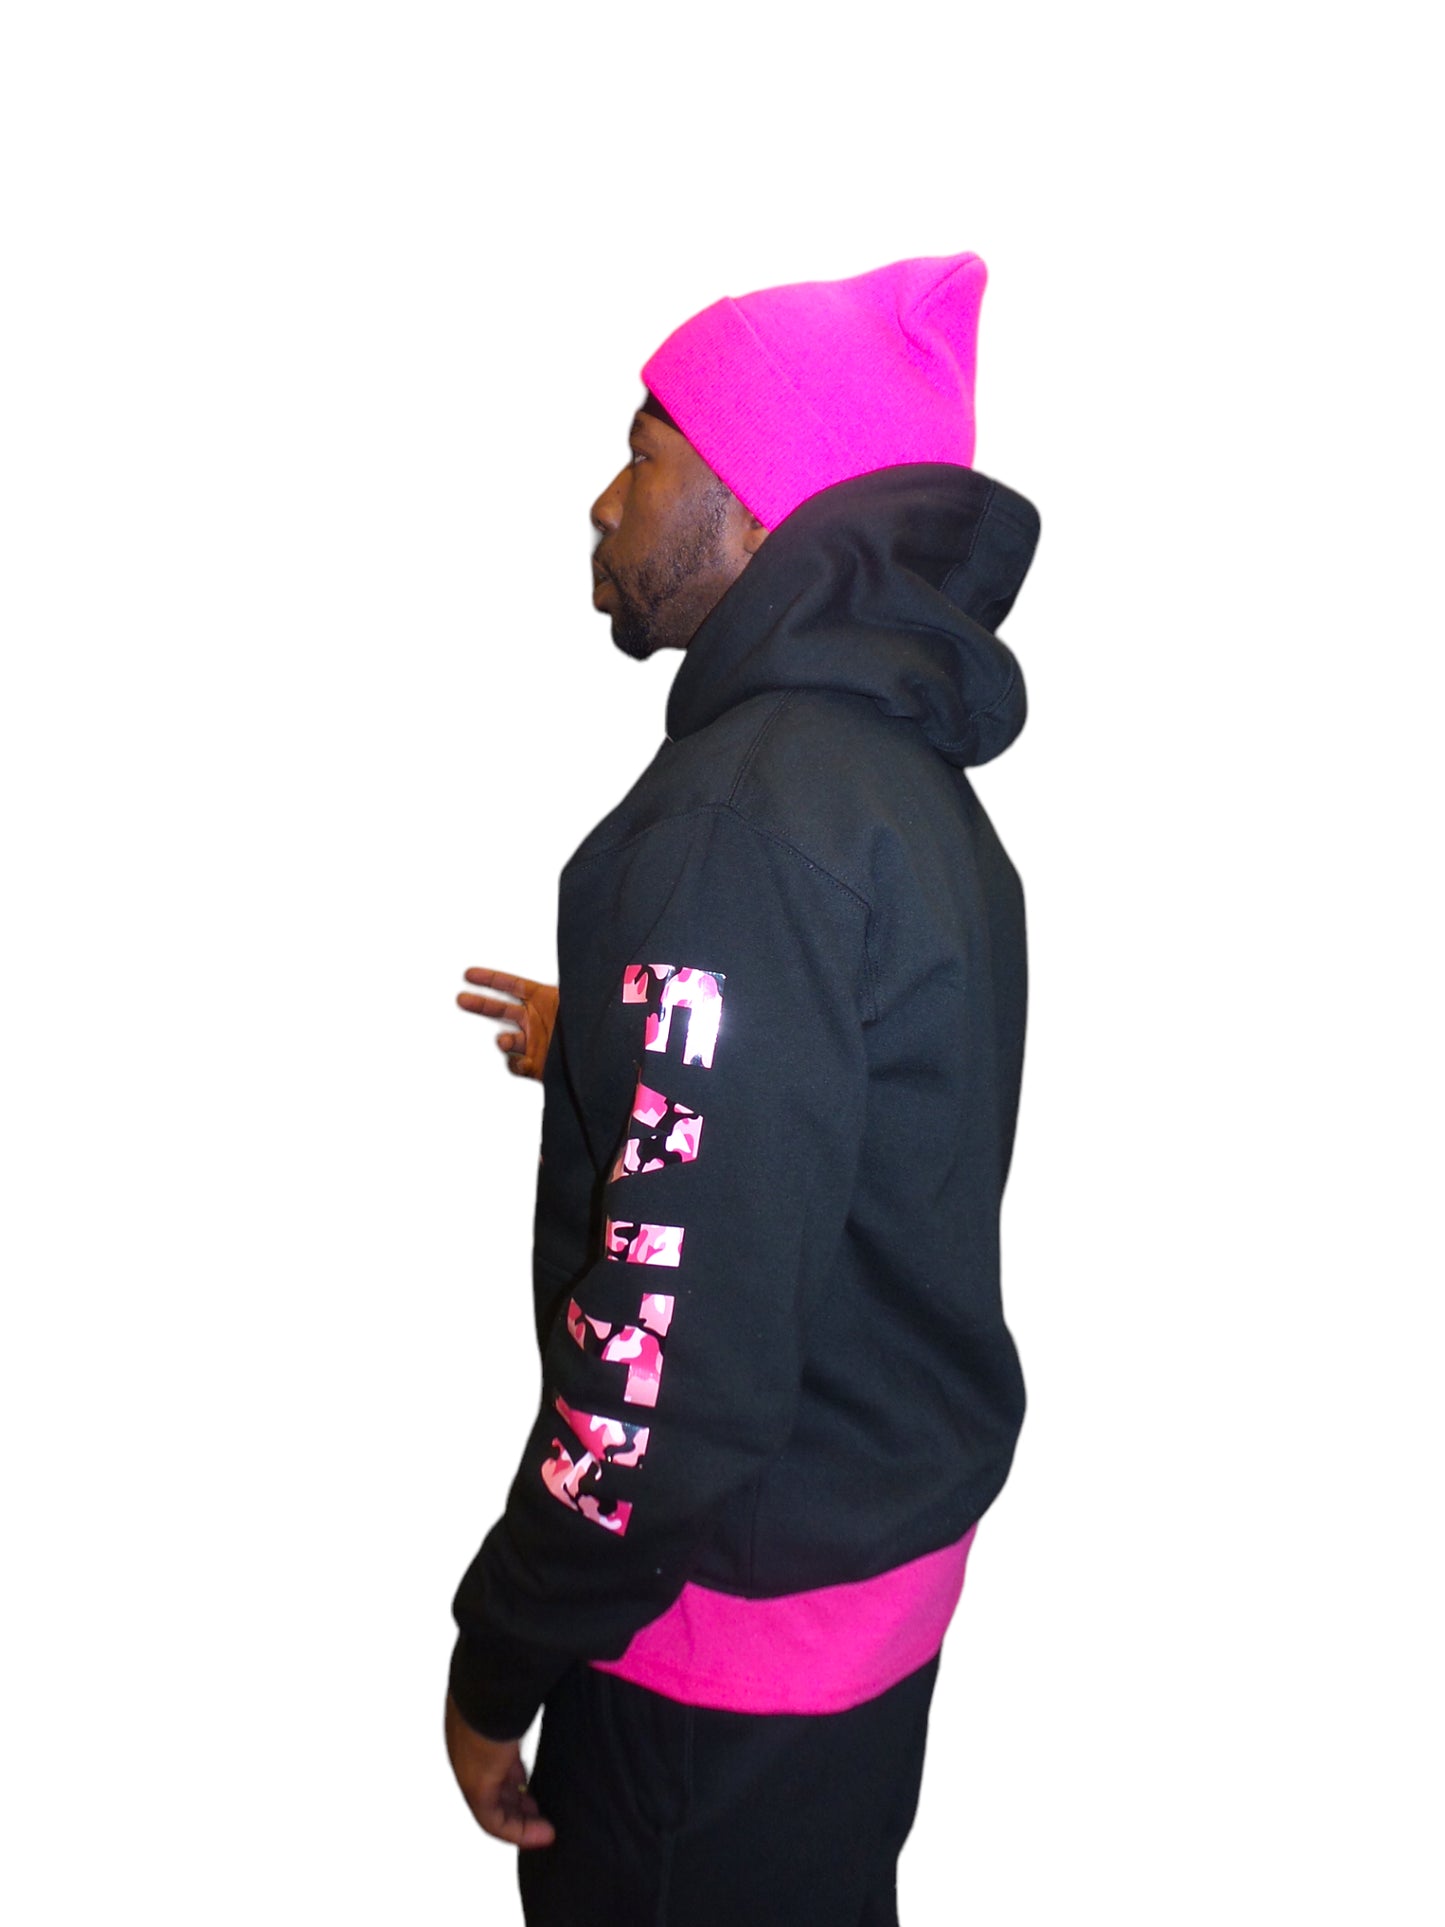 All I Have Is.. Black/Pink Camo (Jogger Set)